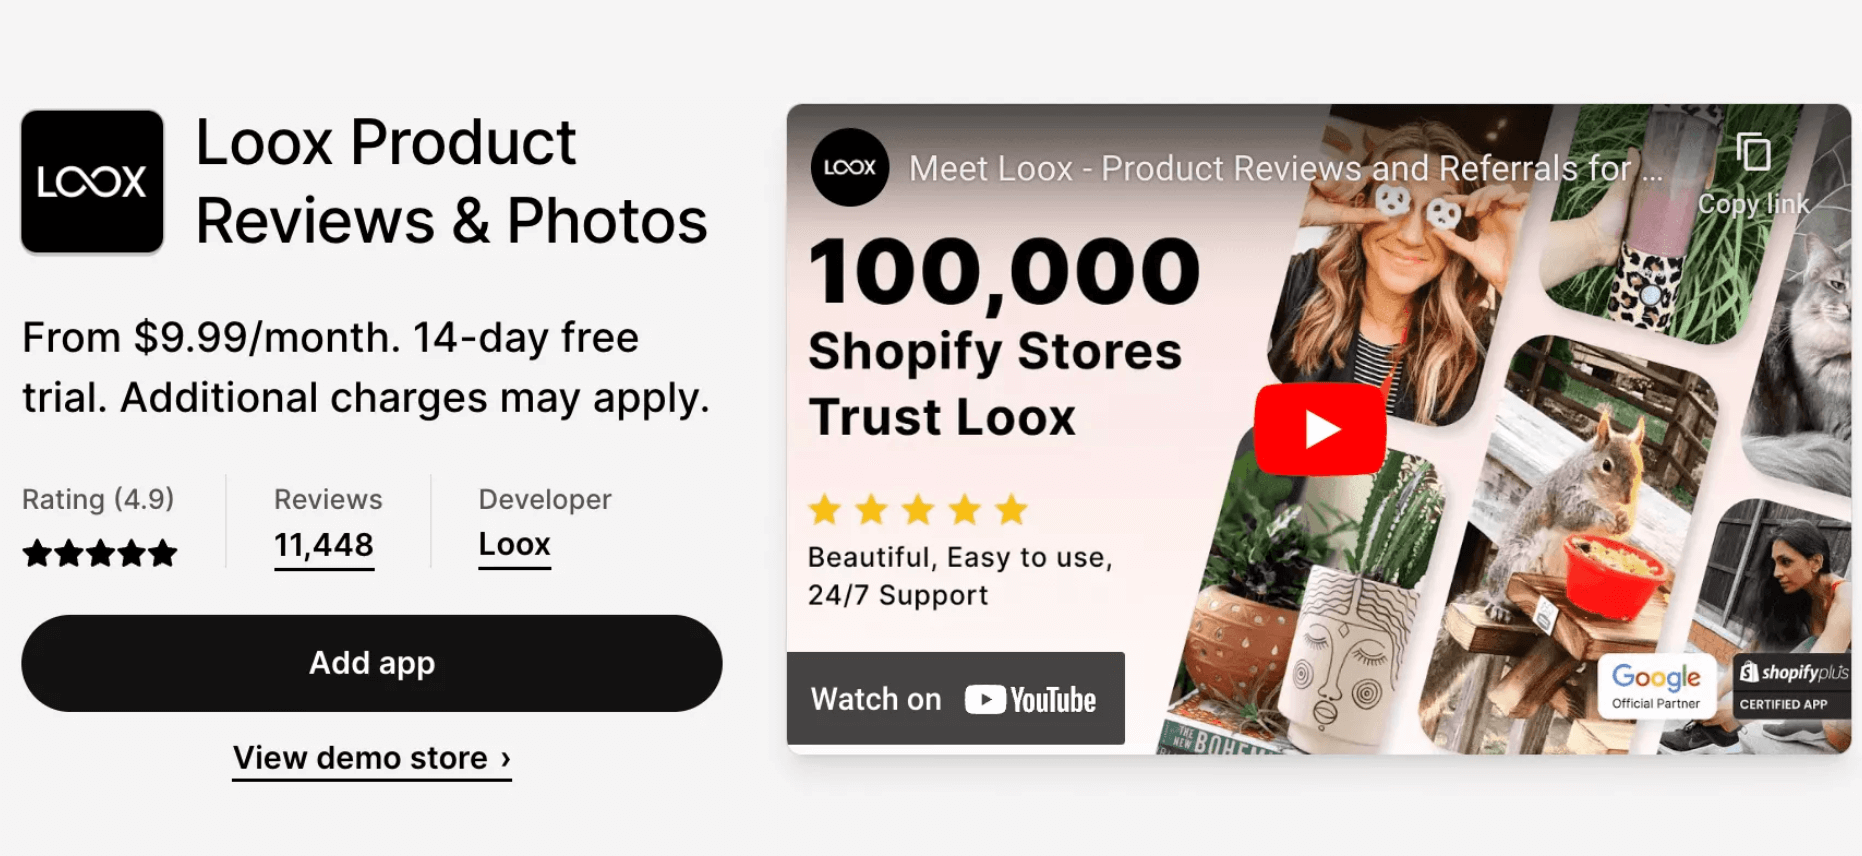 Loox page on Shopify